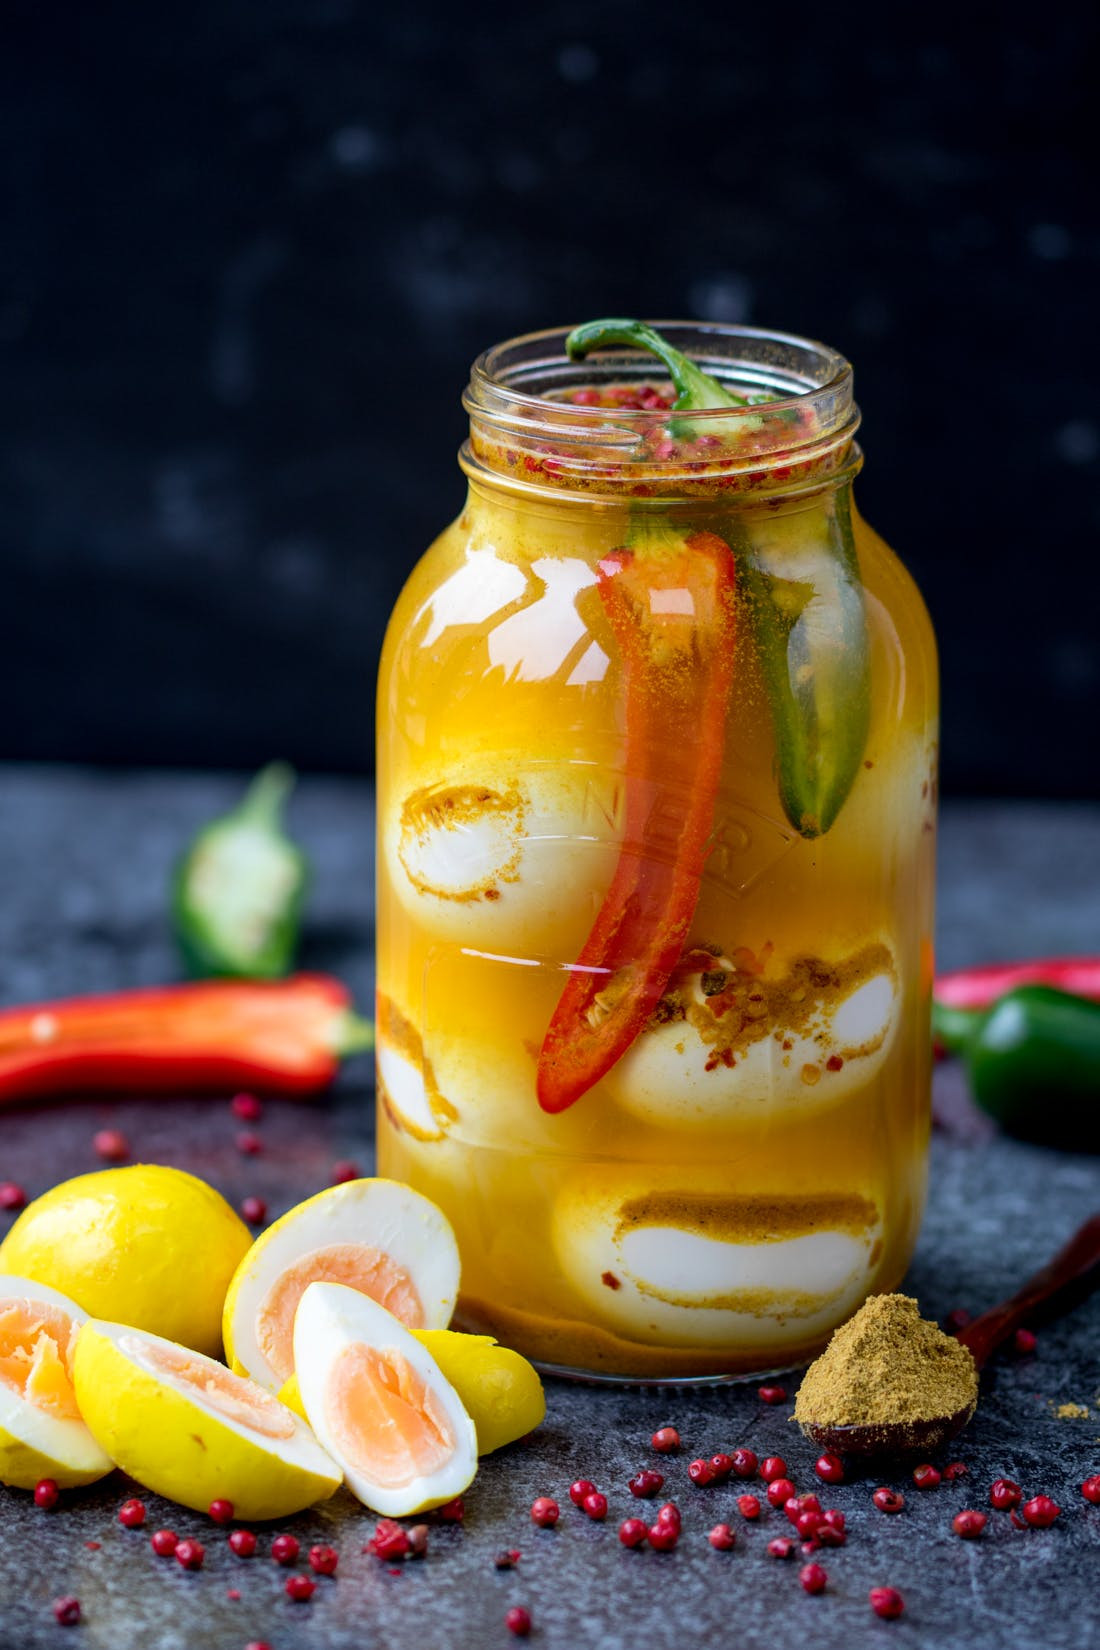 Pickled Eggs Healthy
 OMG Curried Pickled Eggs With Smoked Salt Is Our New Fave